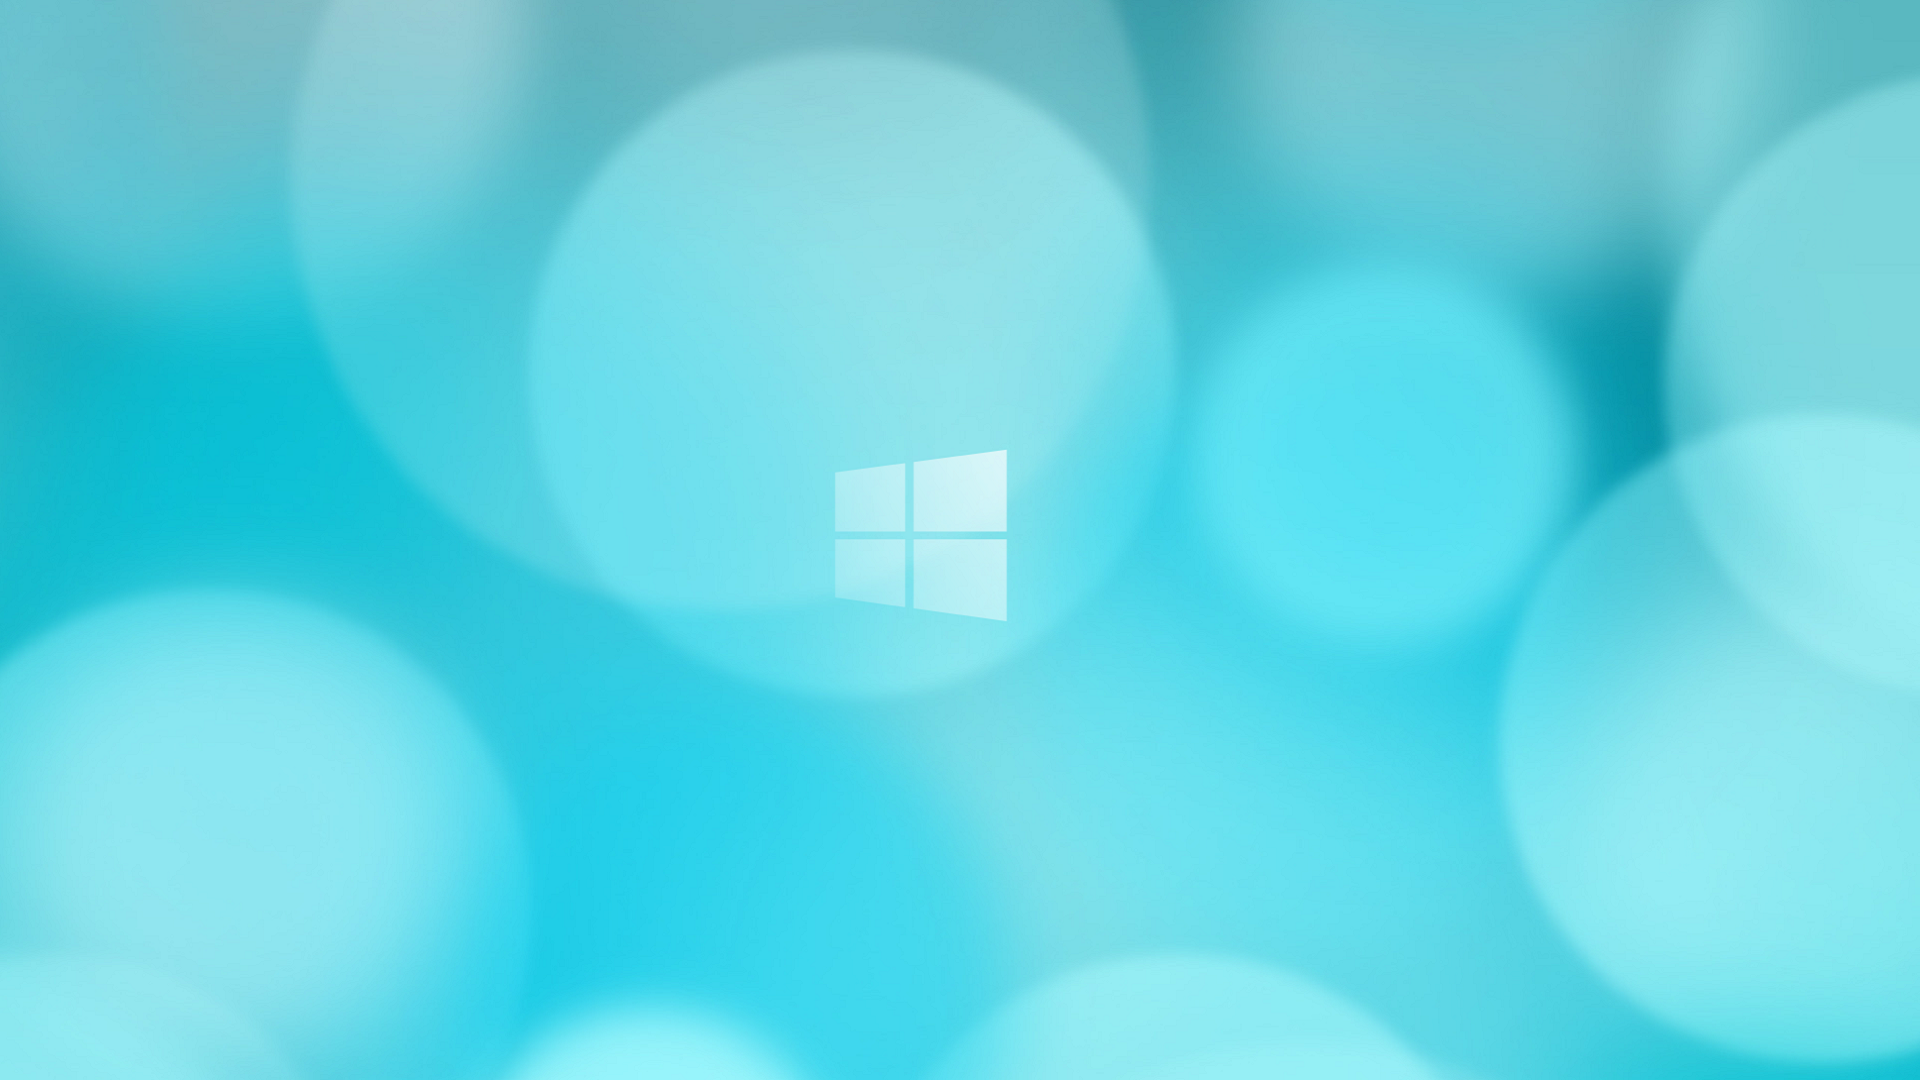 Blue Windows Themes Wallpaper Background Cool